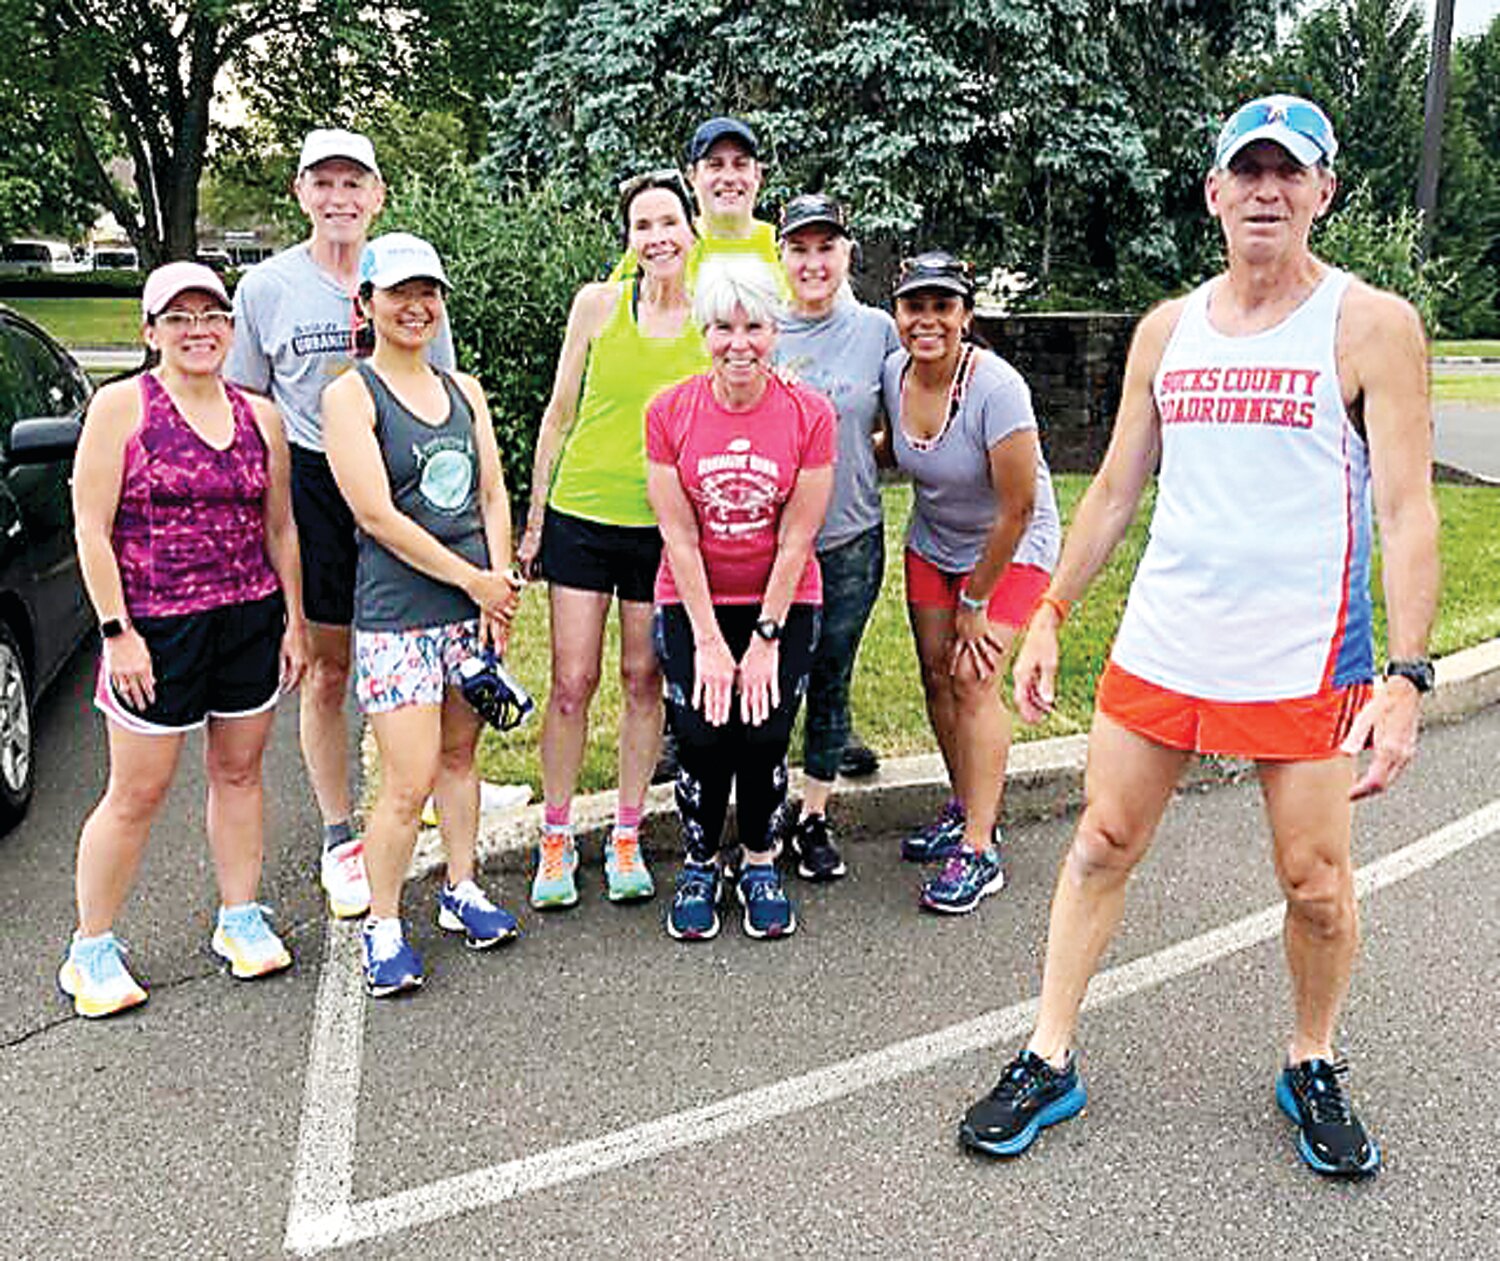 The Bucks County Roadrunners Club’s Tuesday night time-trial group braved the smoke from wildfires in the Canadian provinces of Nova Scotia and Quebec to complete its weekly 4-mile run.